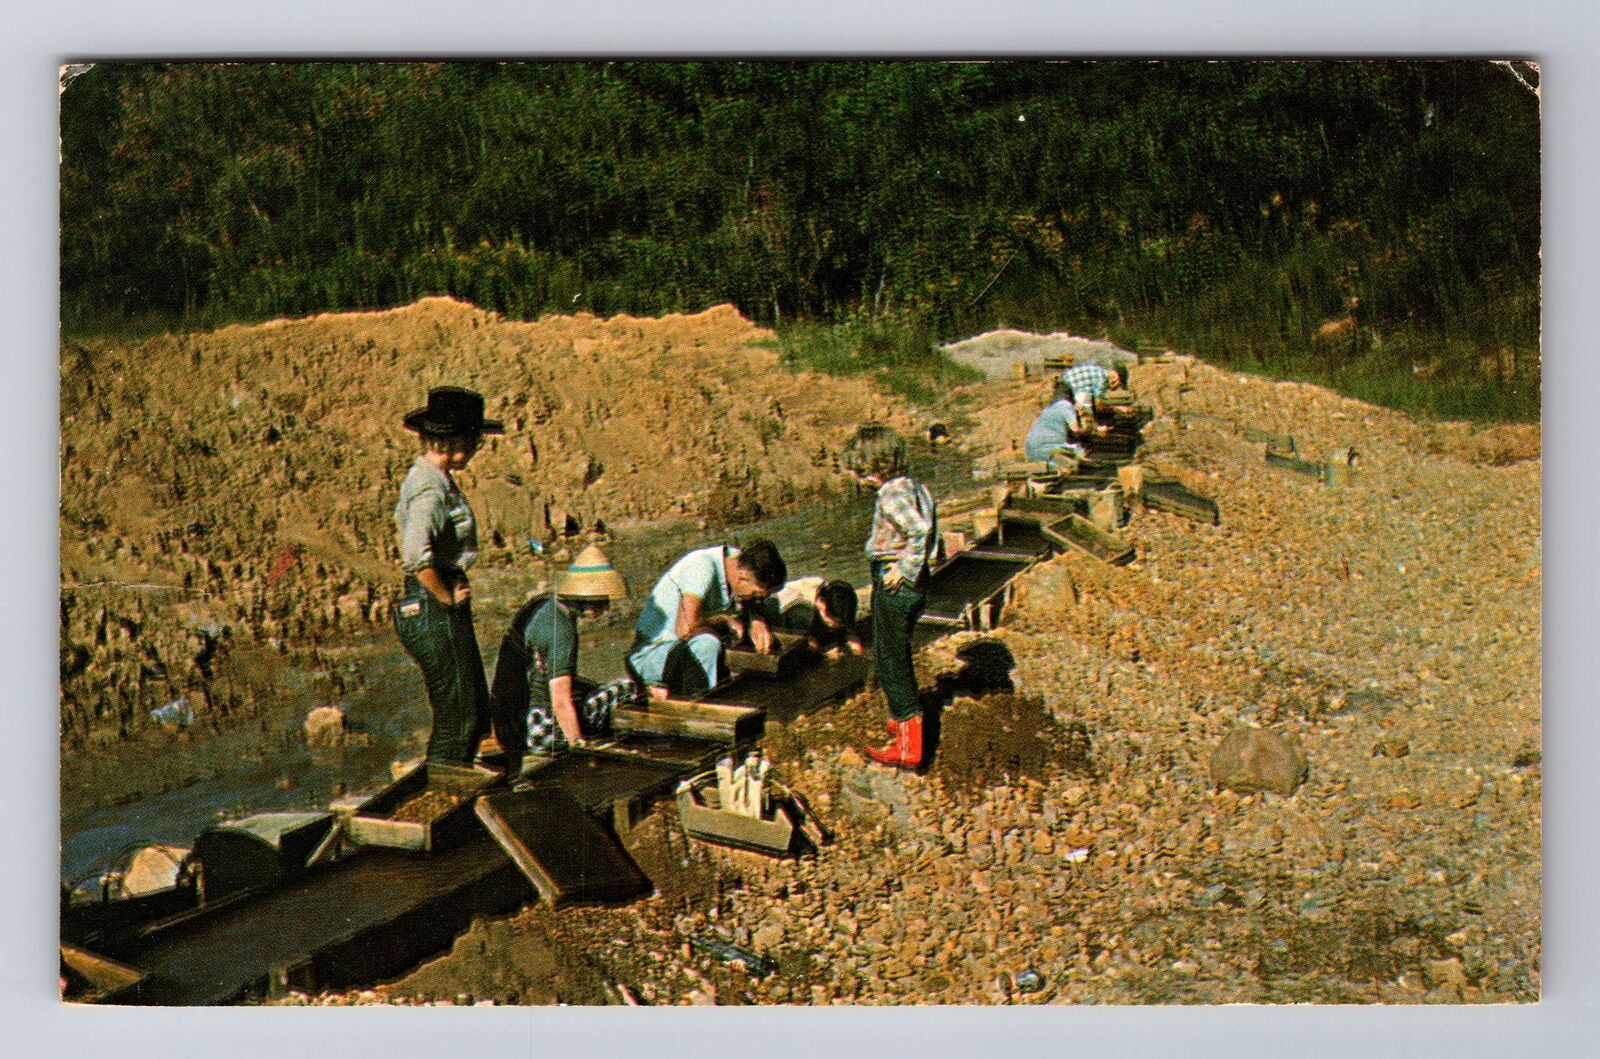 Franklin NC-North Carolina, Panning For Rubies And Minerals, Vintage Postcard